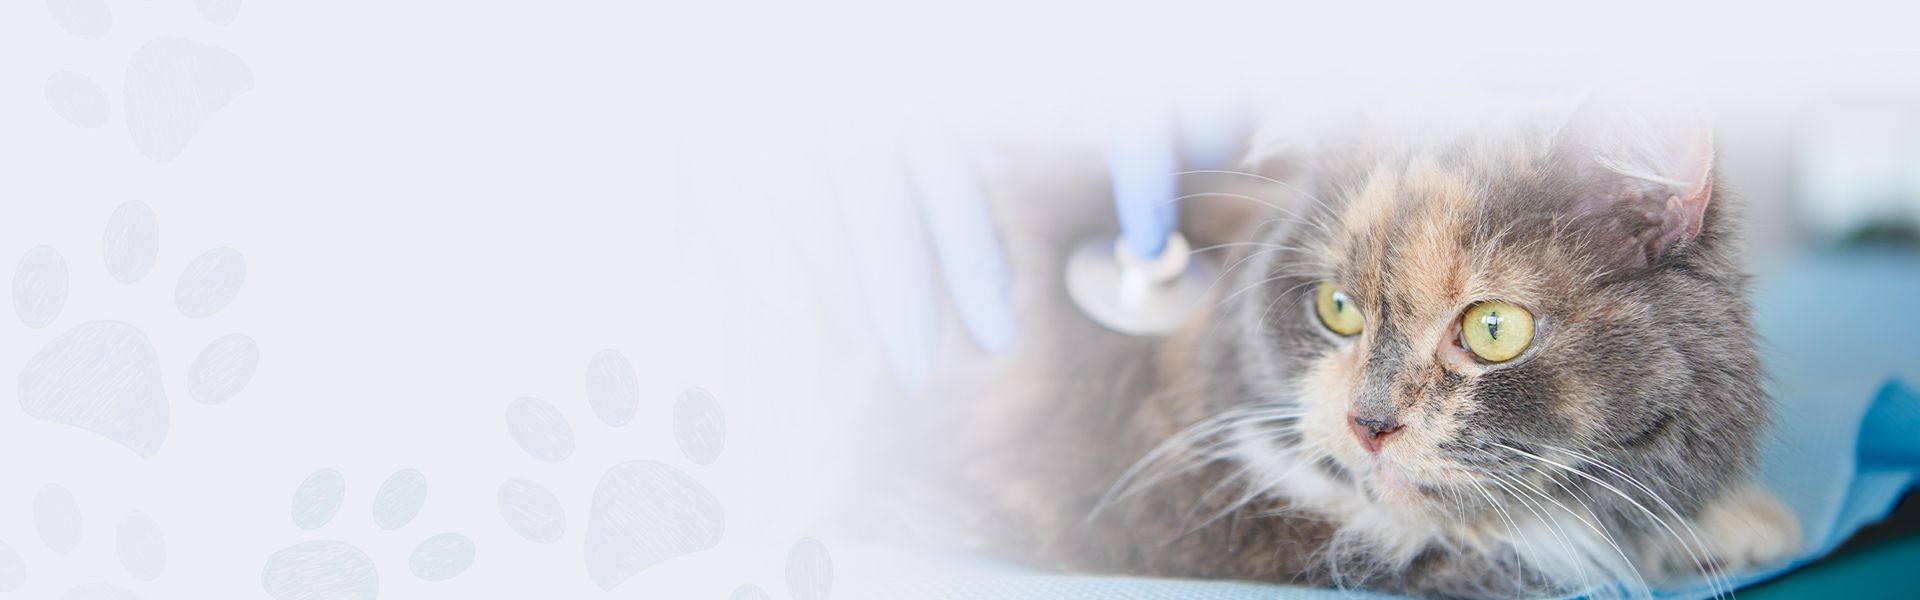 cat being examined by a vet with a stethoscope and blue gloves